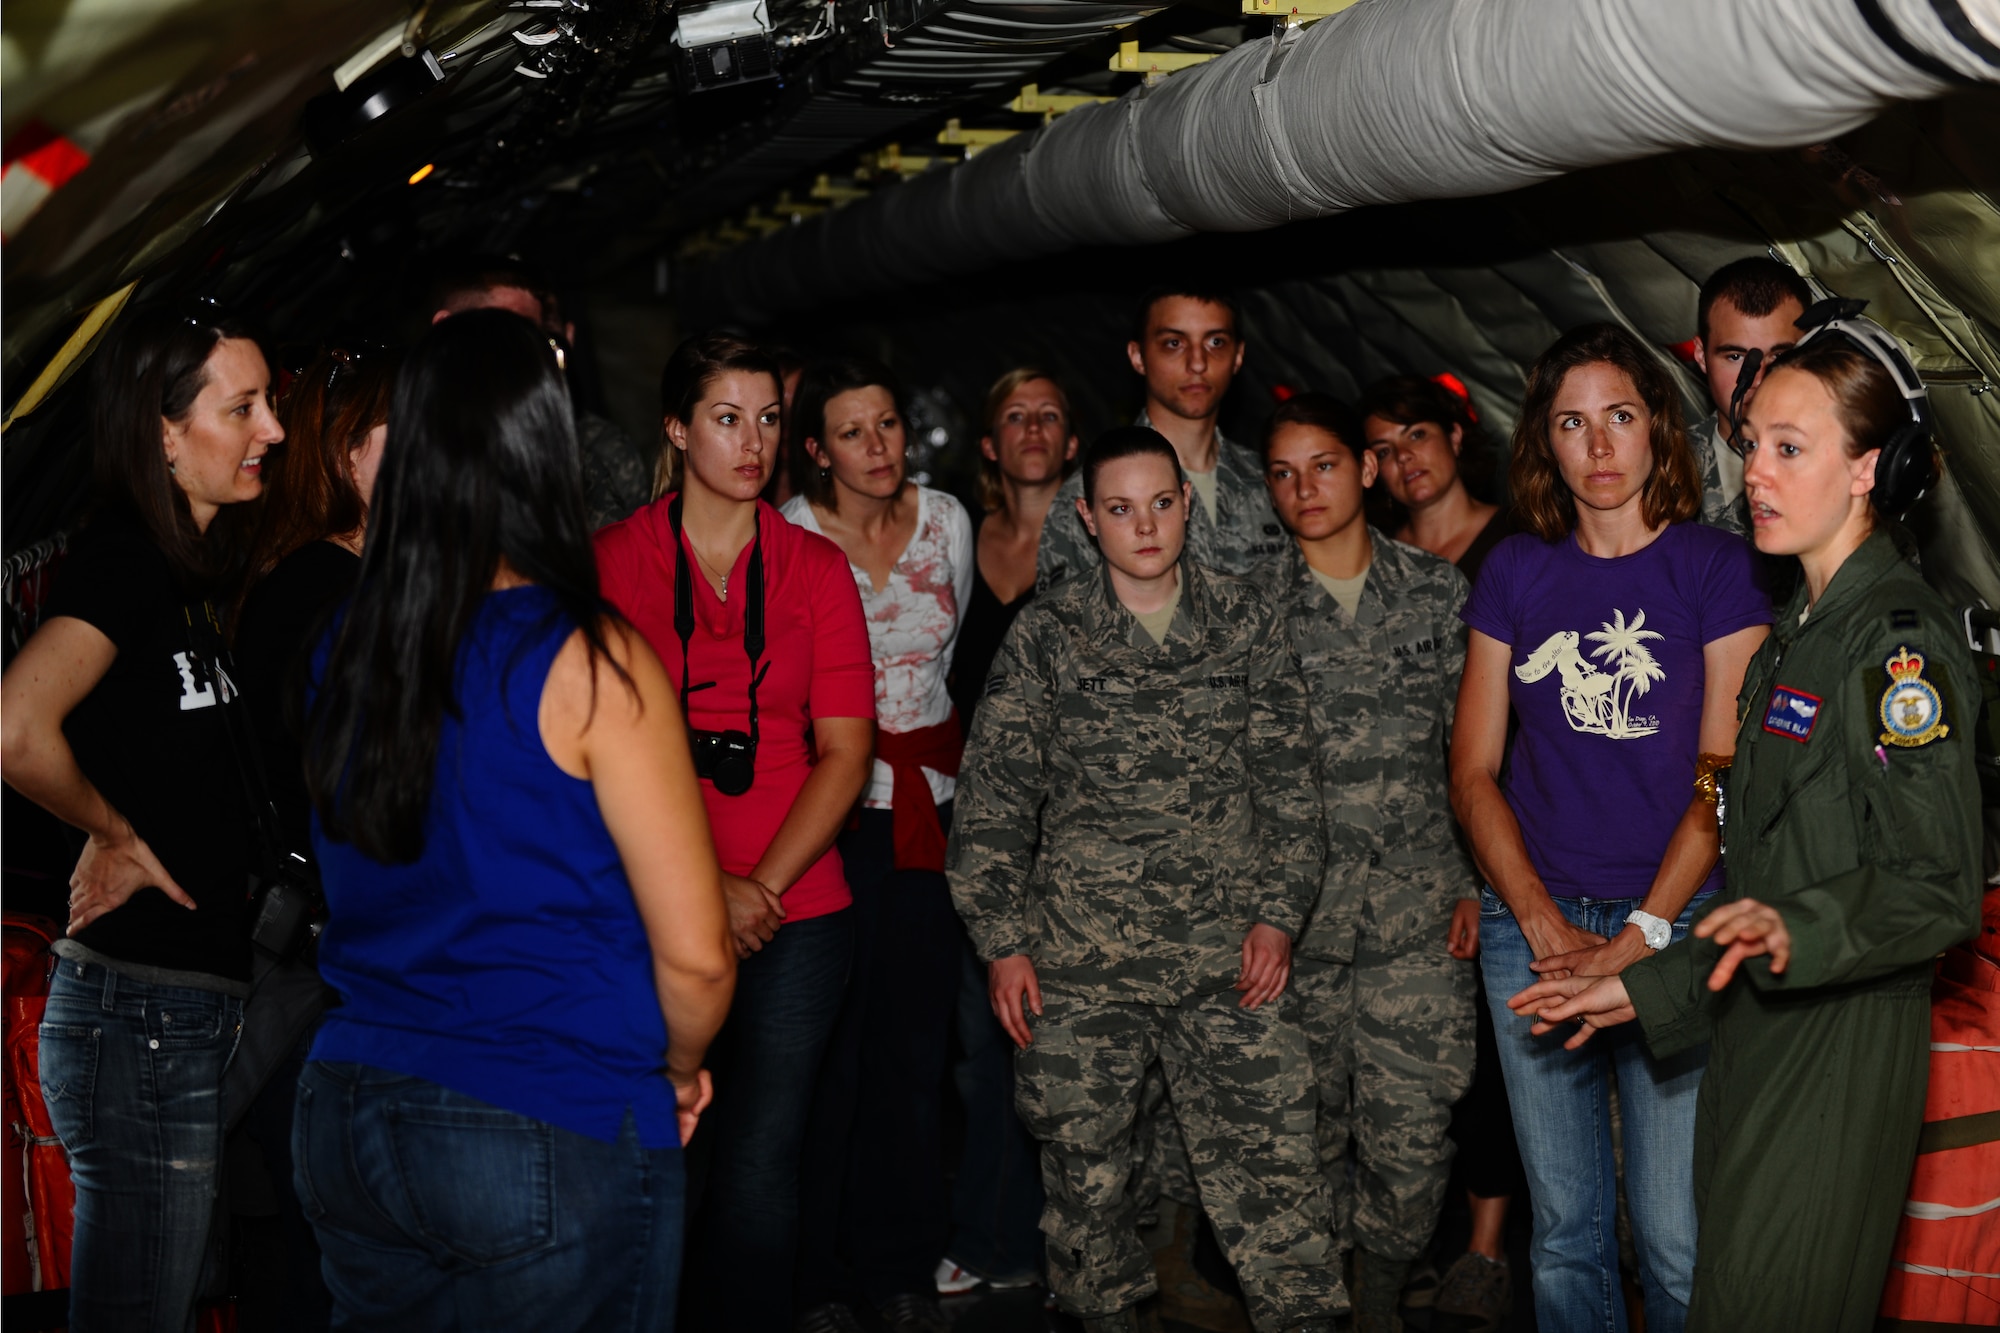 SPANGDAHLEM AIR BASE, Germany – Capt. Catherine Blake, right, 351st Air Refueling Squadron KC-135 Stratotanker pilot, gives a safety briefing to 25 52nd Fighter Wing Airmen and spouses before an orientation flight here May 23. The Airmen and spouses flew on a 351st ARS KC-135 stationed out of Royal Air Force Mildenhall, England during an in-flight refueling of 81st and 480th Fighter Squadron aircraft from Spangdahlem AB. The 351st ARS and 52nd FW aircrew train together to enhance their interoperability to perform in-flight refueling missions. (U.S. Air Force photo by Airman 1st Class Matthew B. Fredericks/Released)